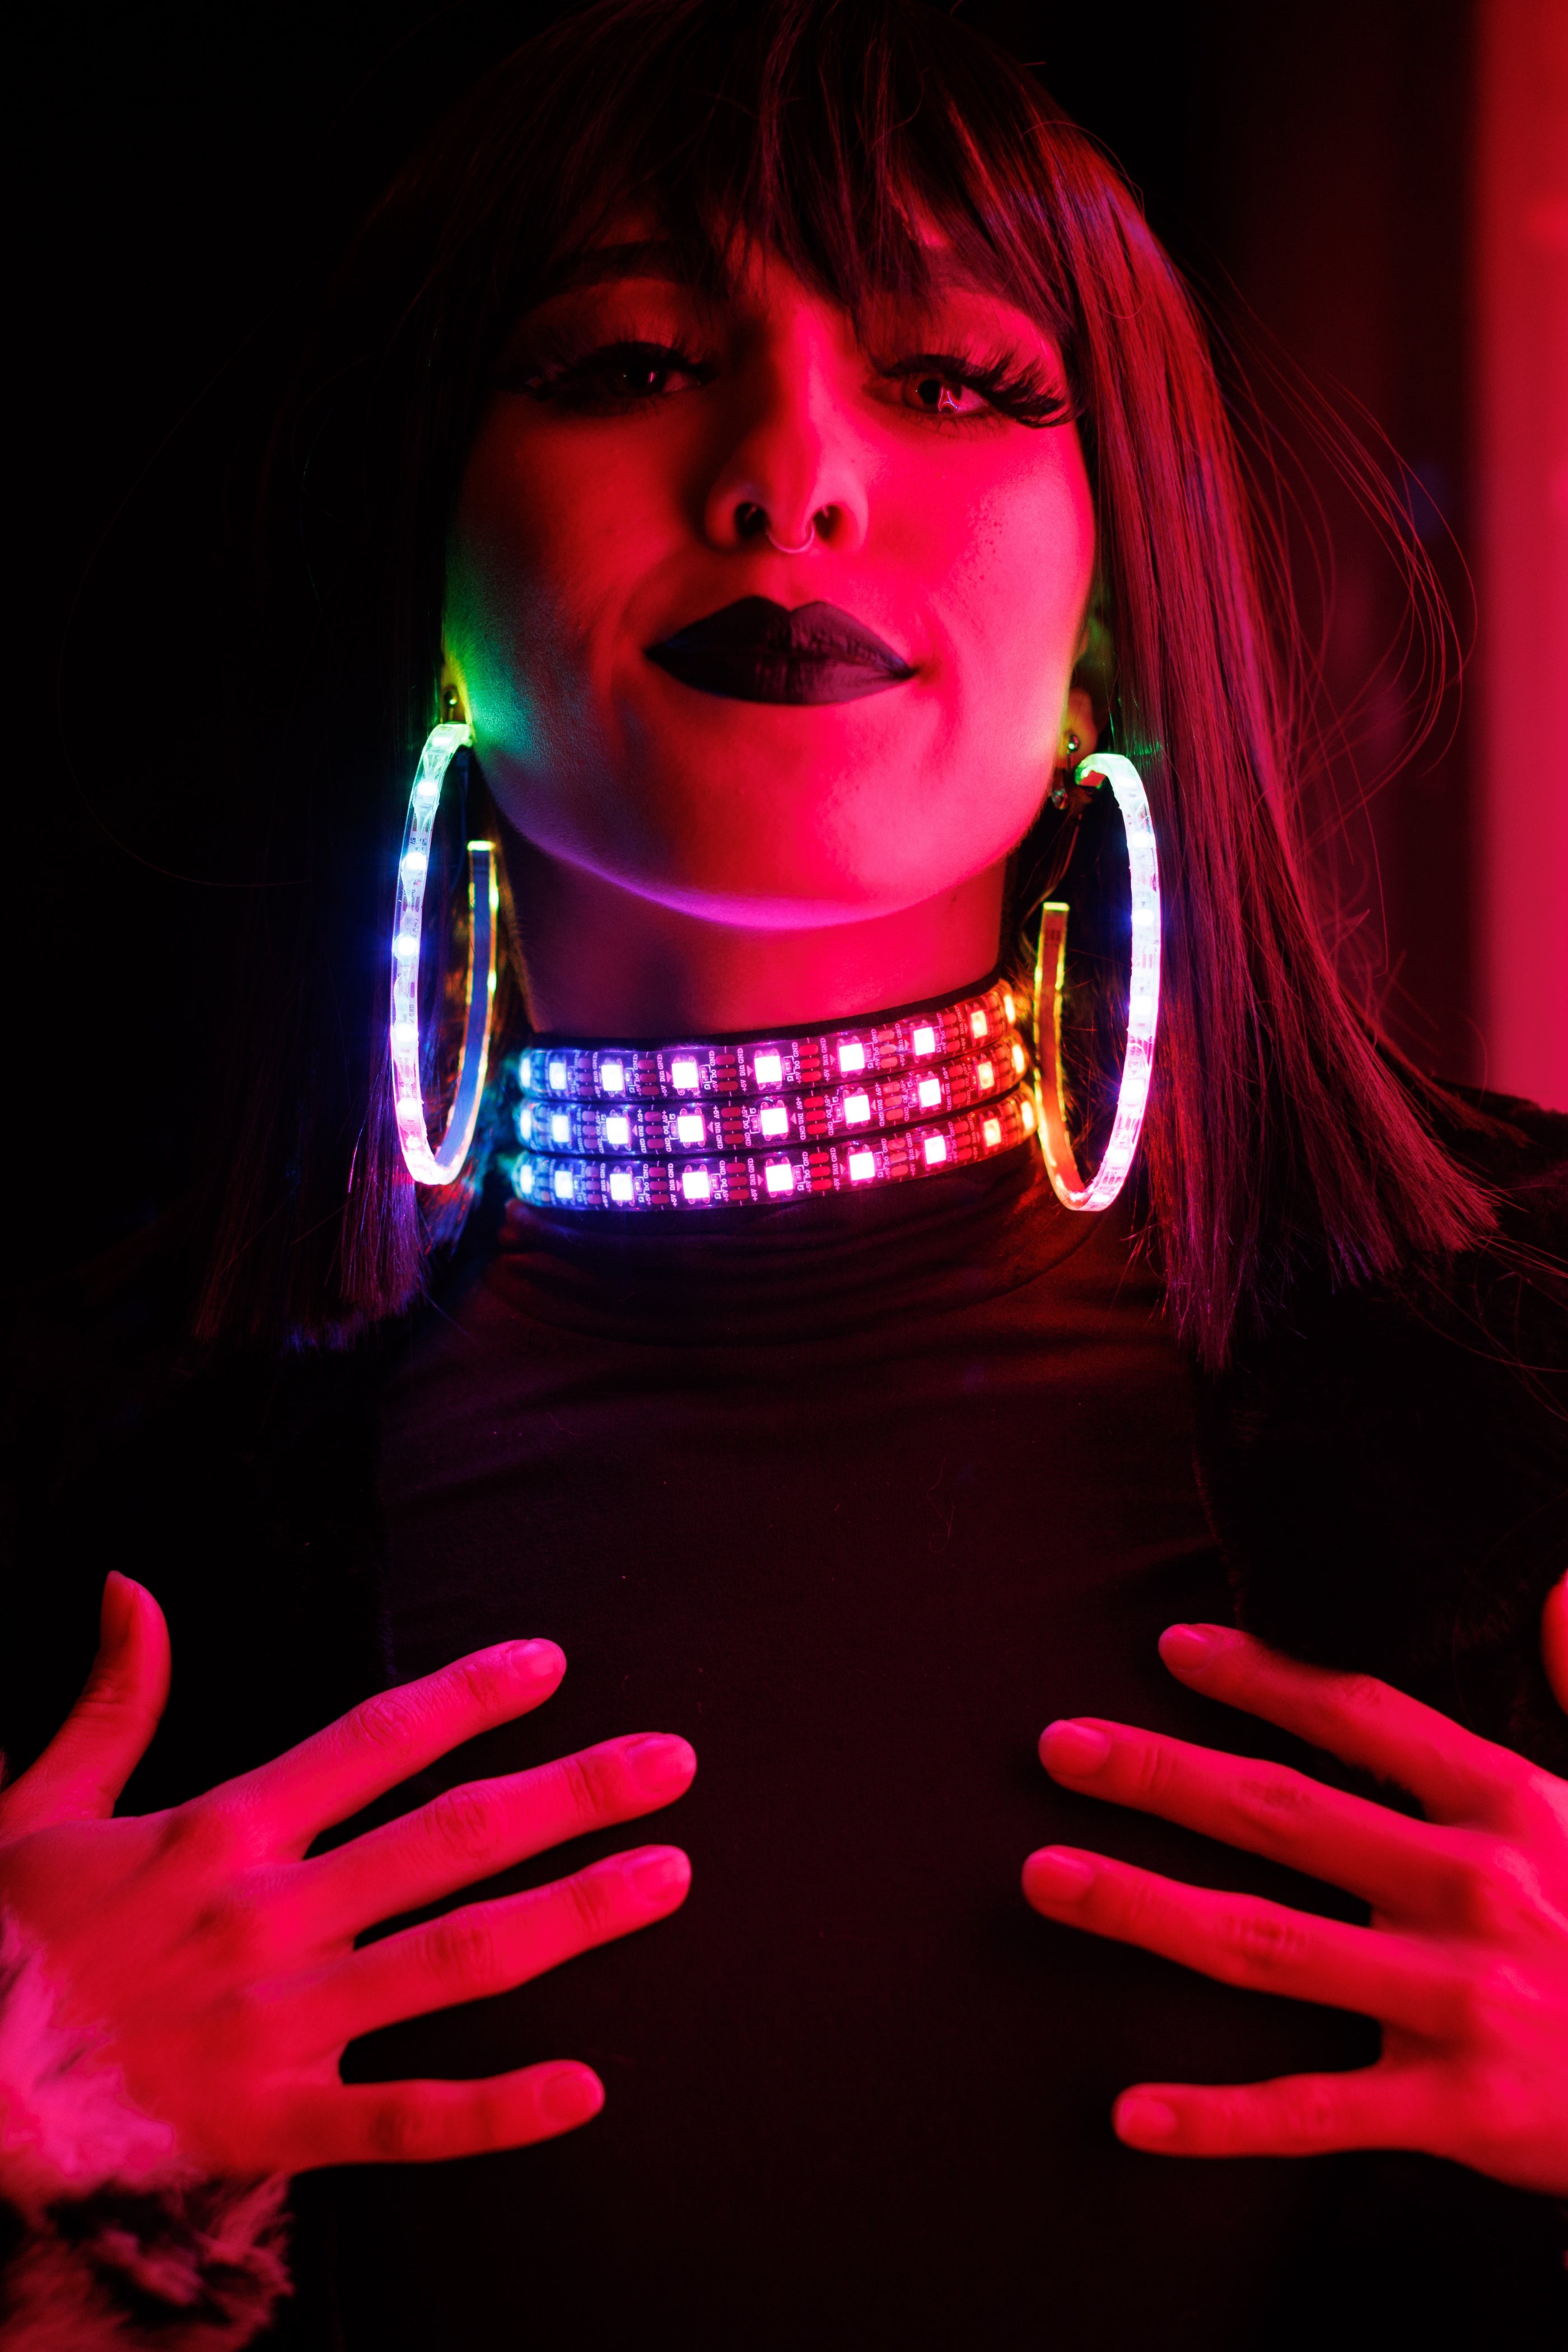 LED Clip-on Hoop Earrings with Battery Pack